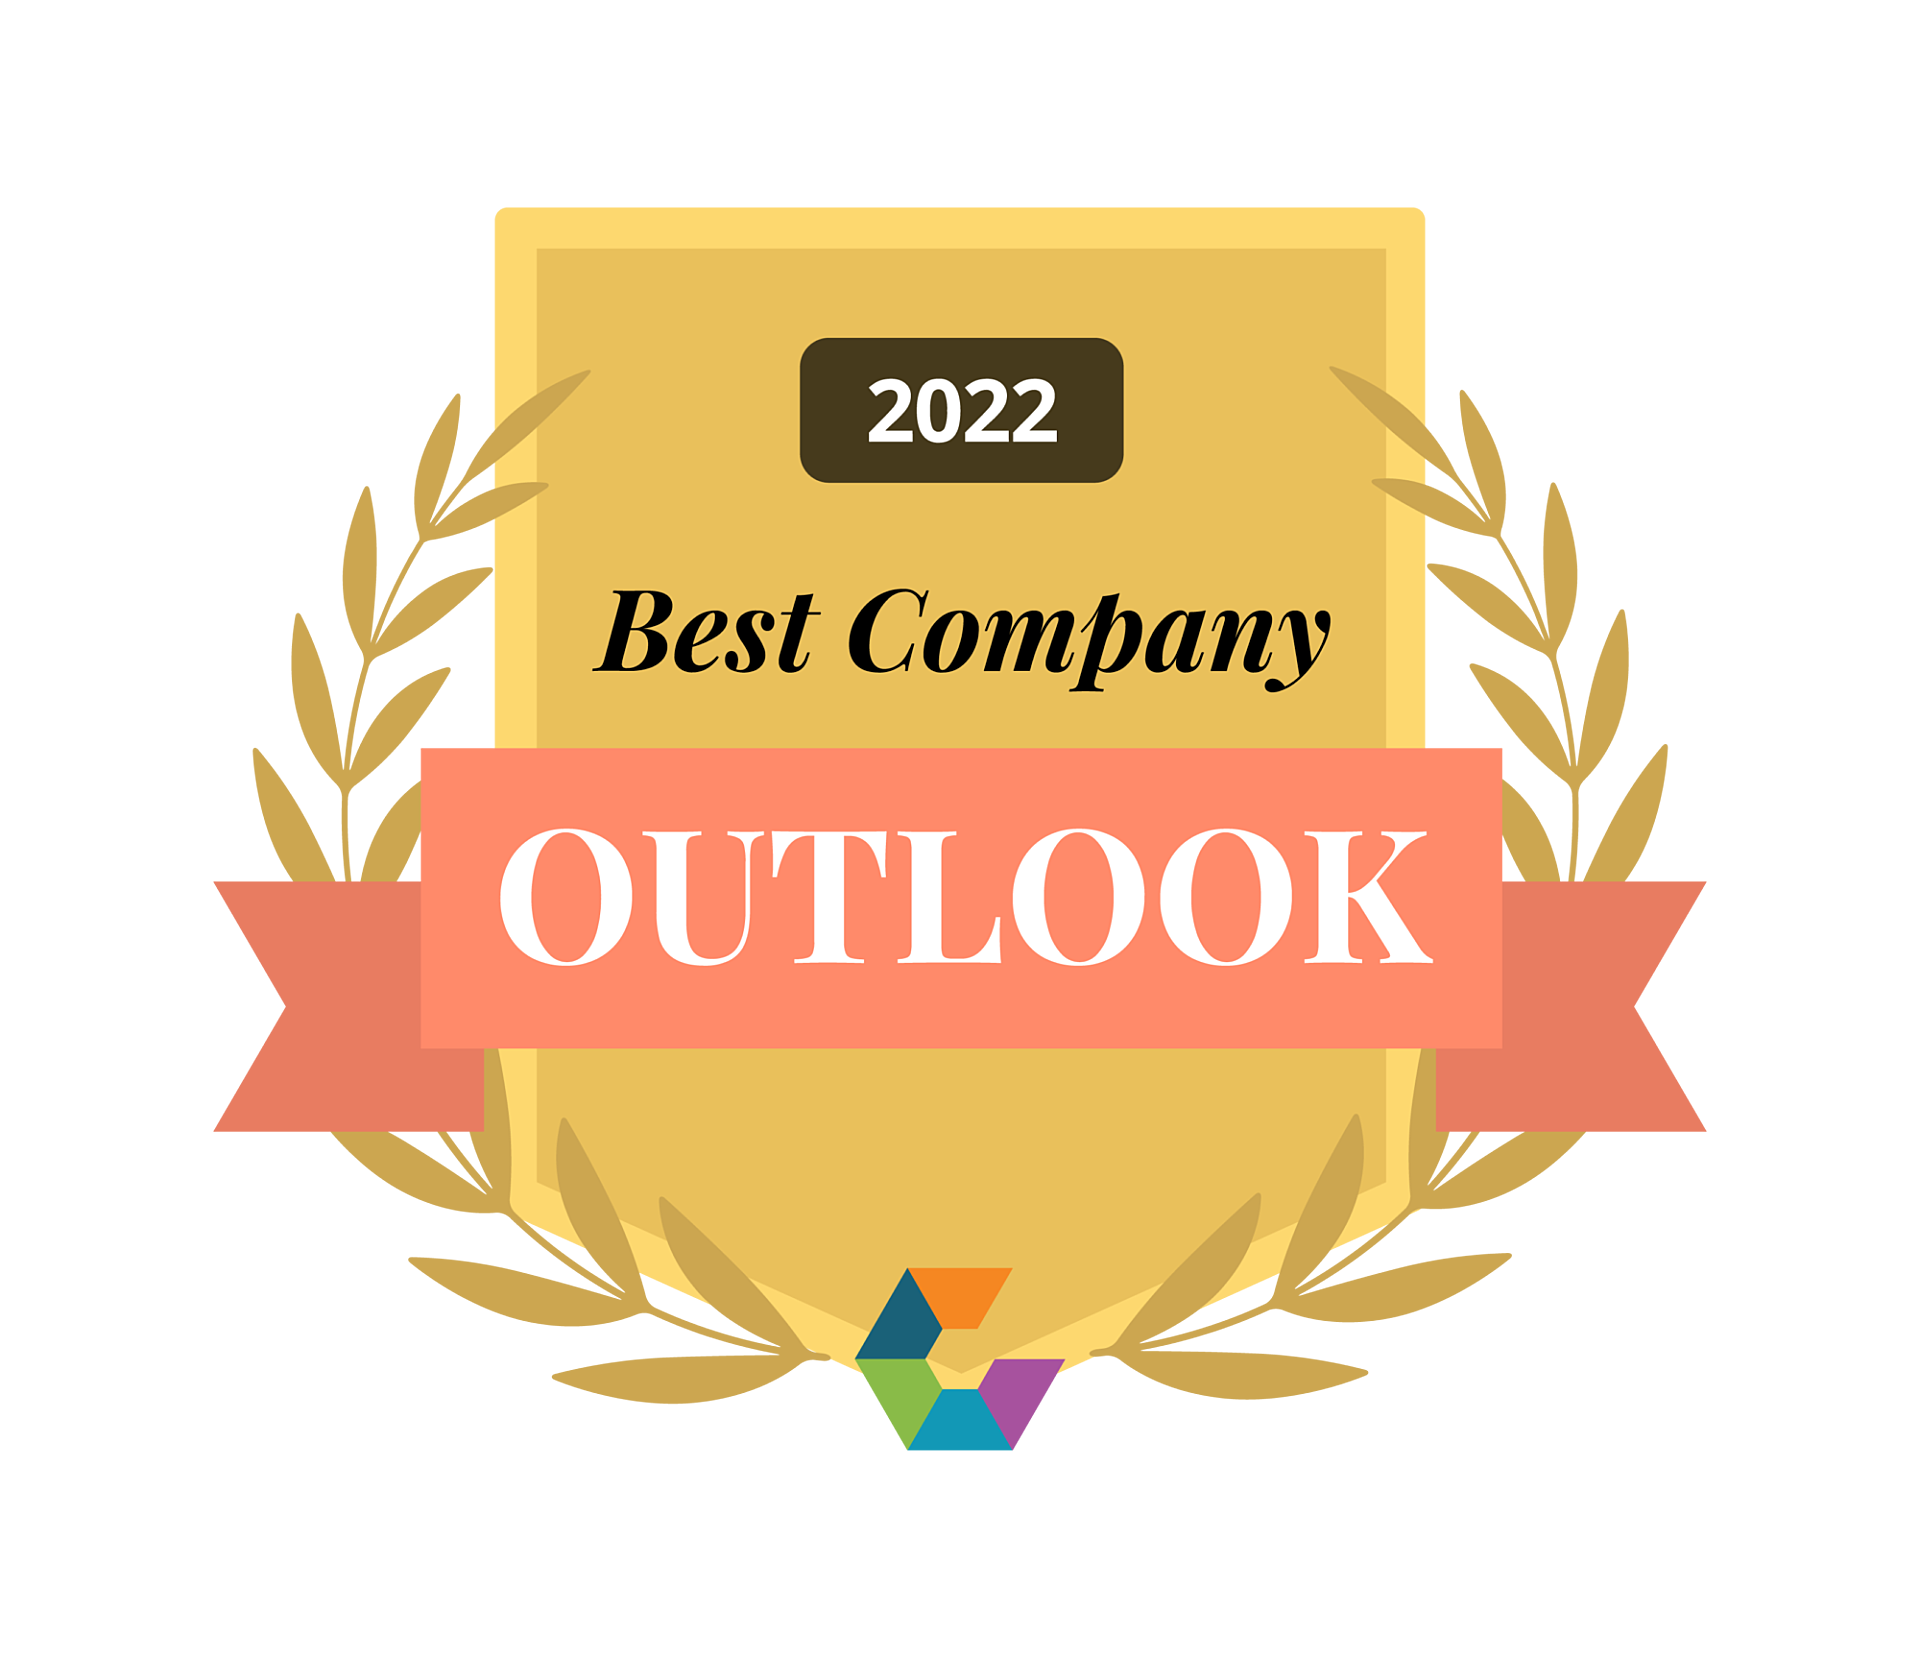 Best company outlook 2022